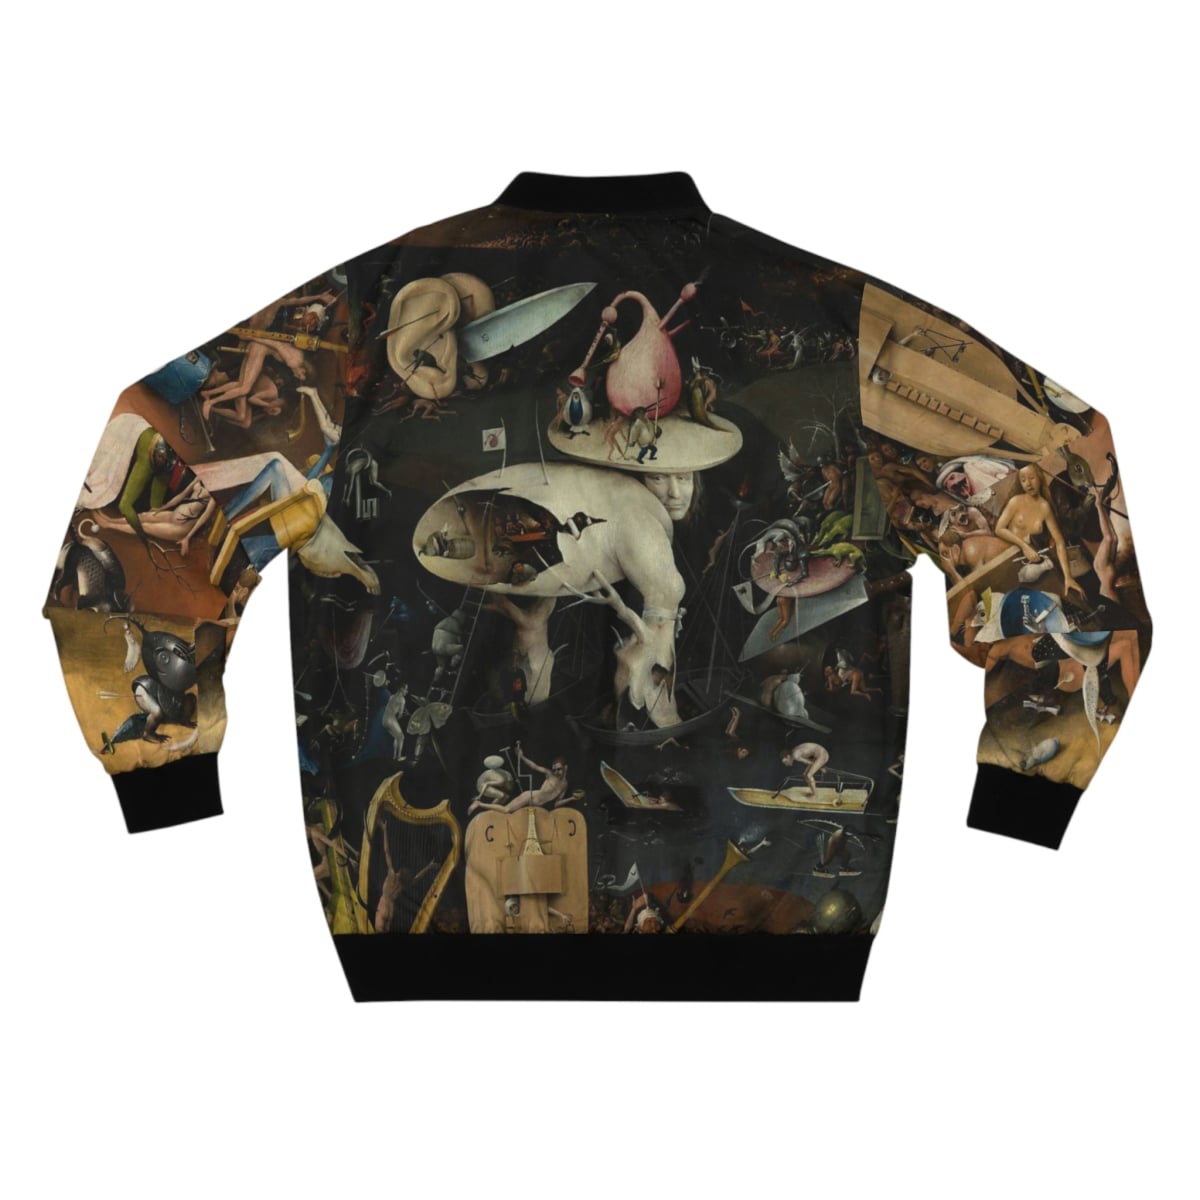 The Garden of Earthly Delights Hieronymus Bosch Bomber Jacket